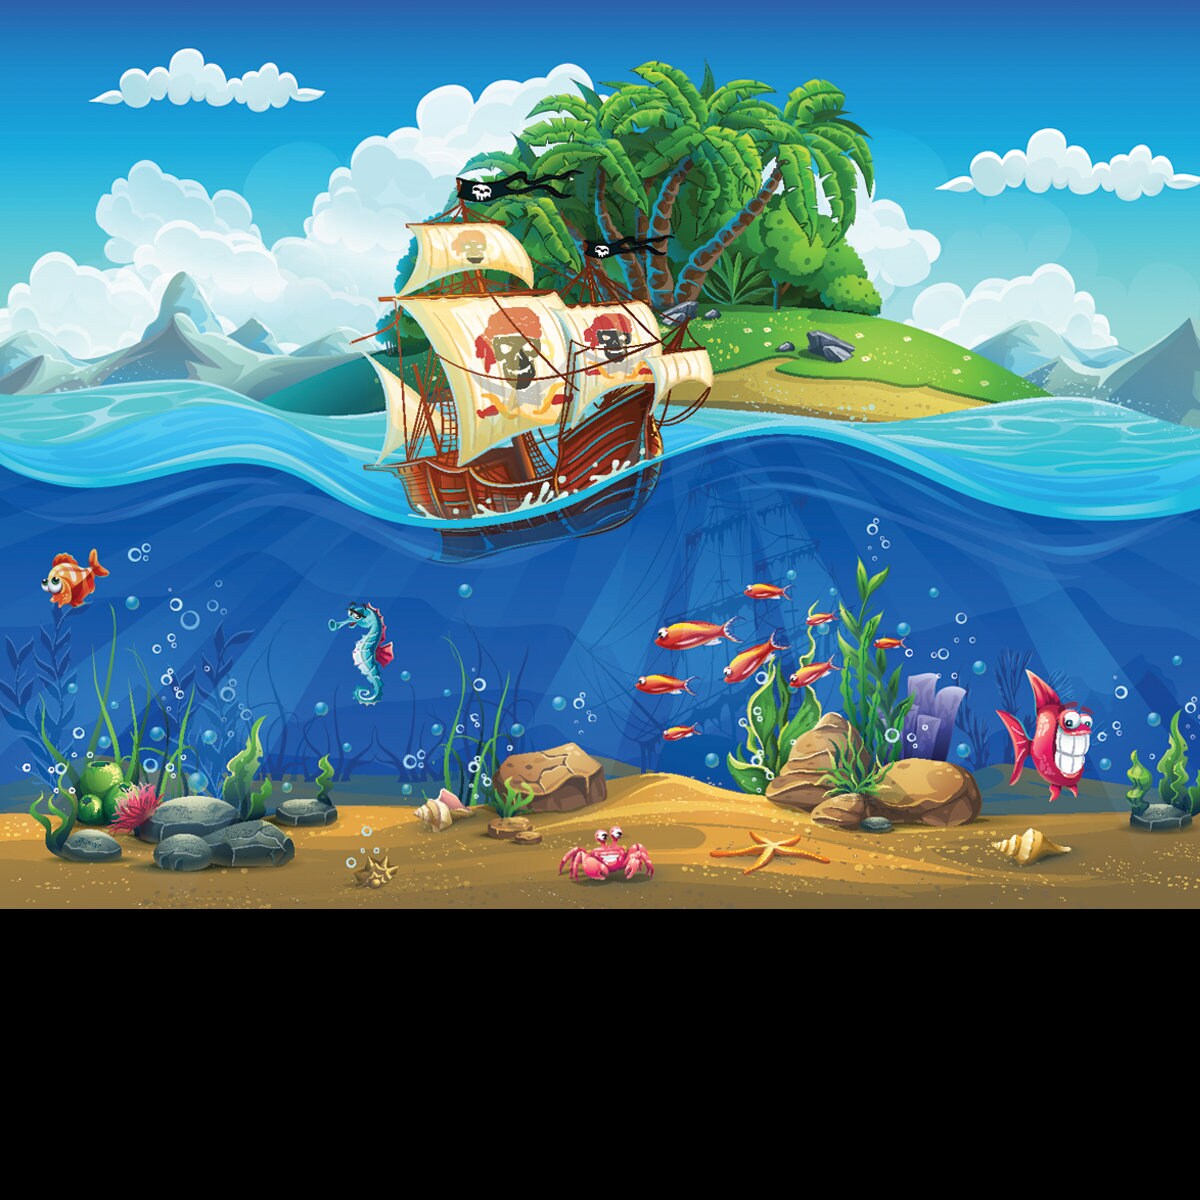 Cartoon Underwater World with Fish, Plants, Island and Ship Wallpaper Little Boys Room Mural